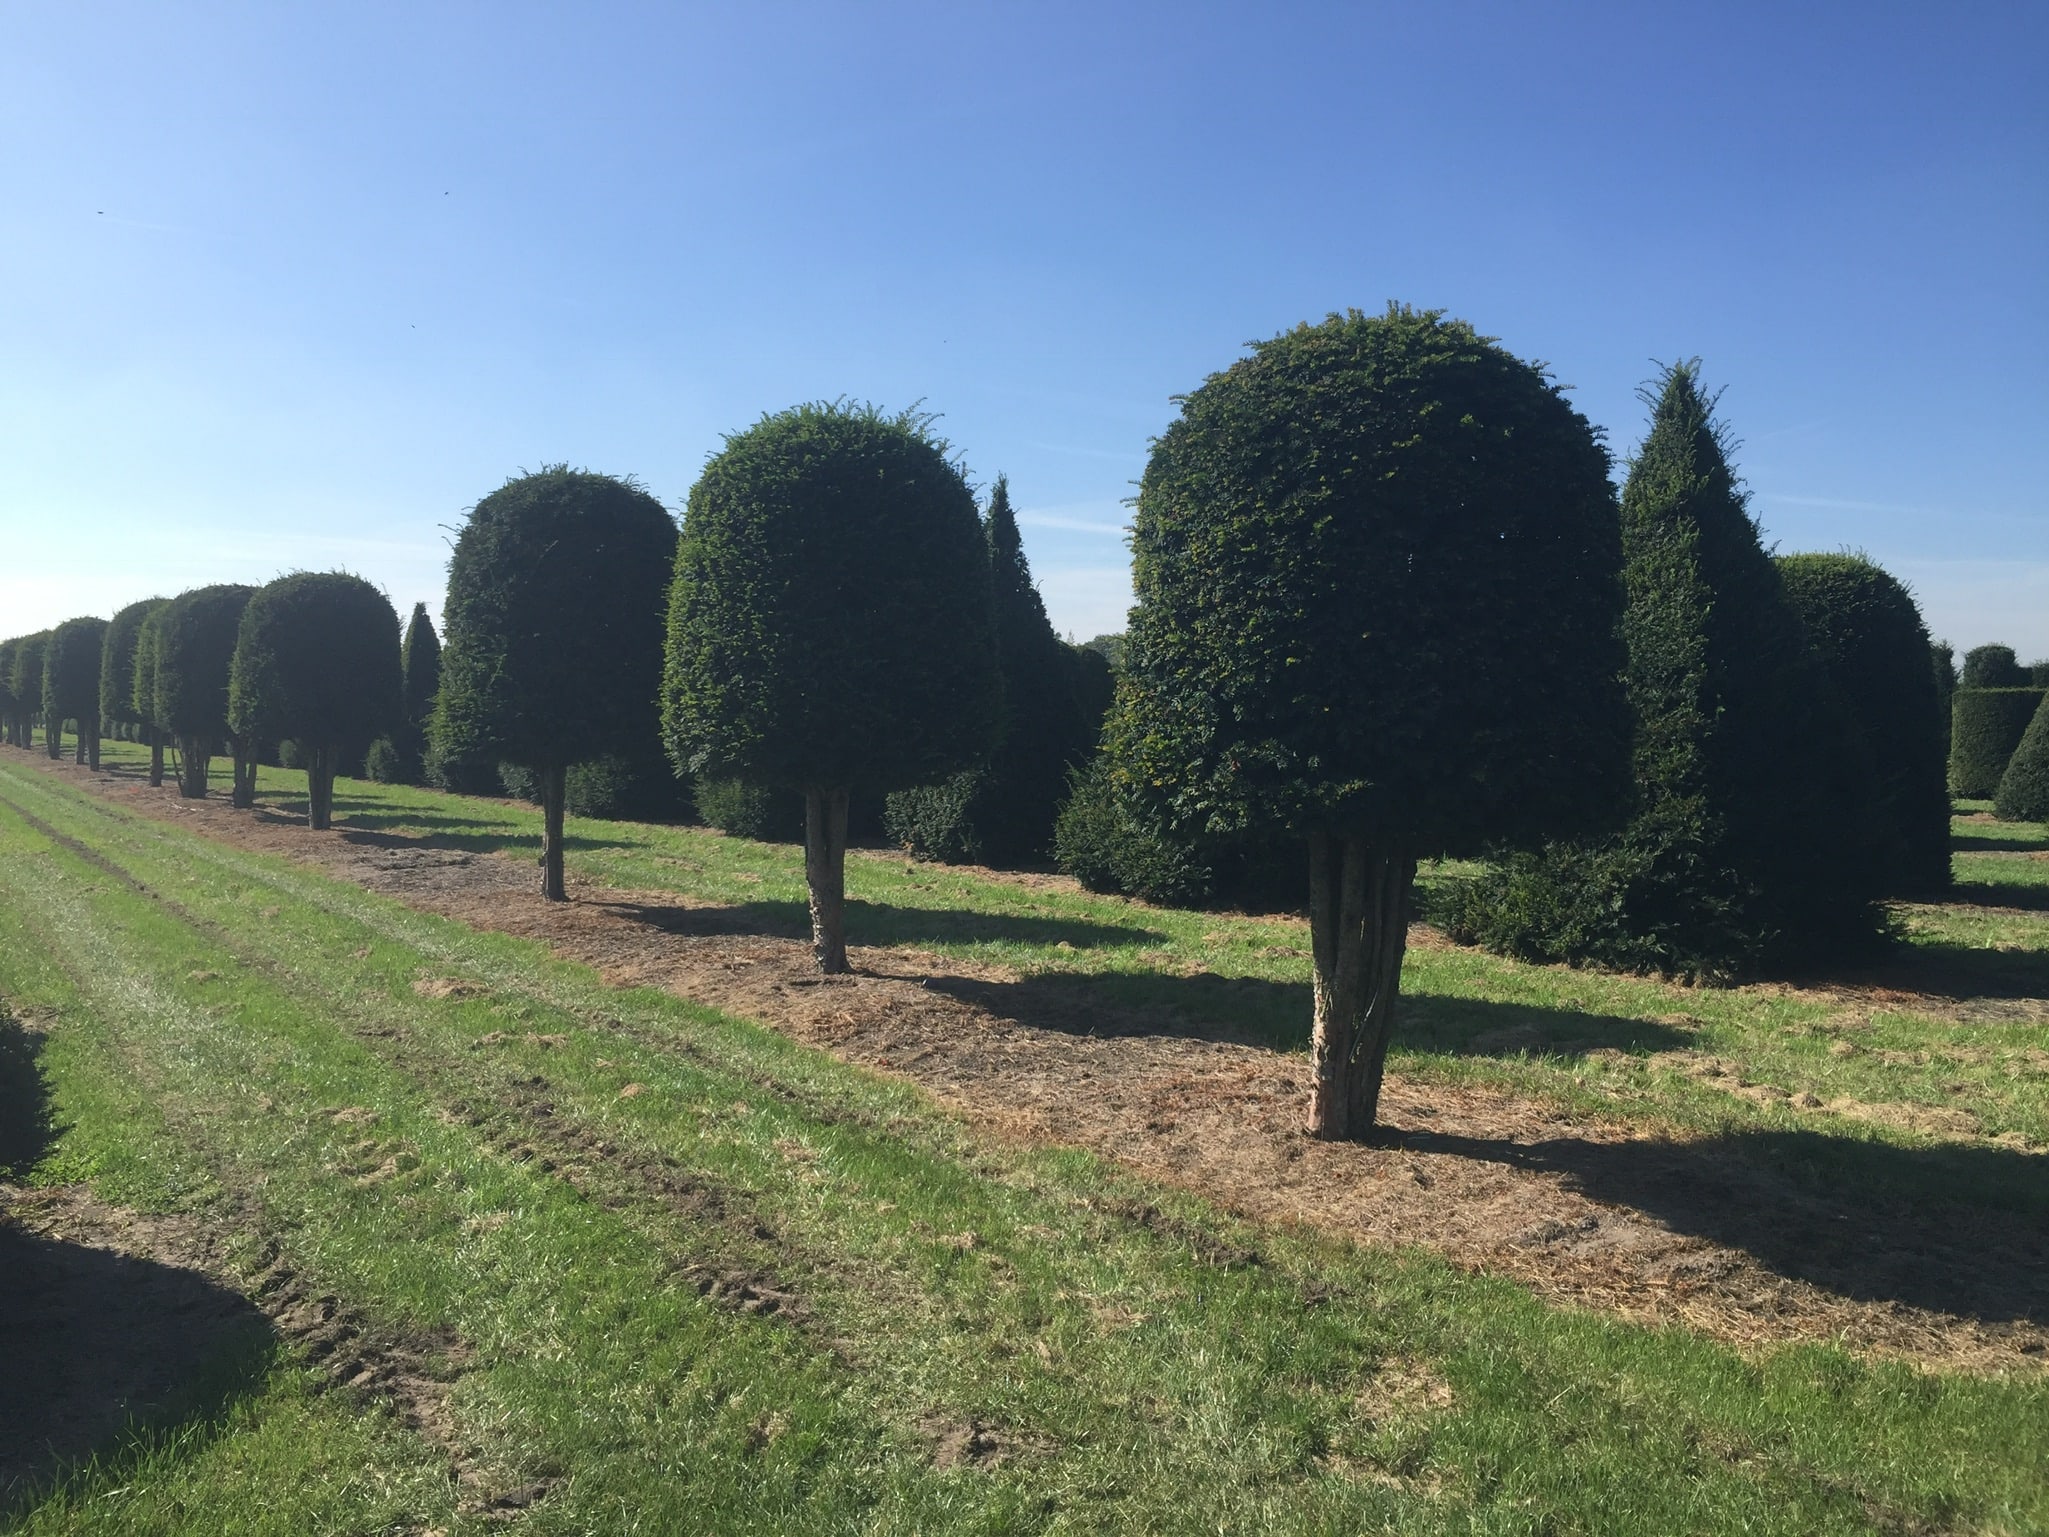 planted topiary trees growing in a field